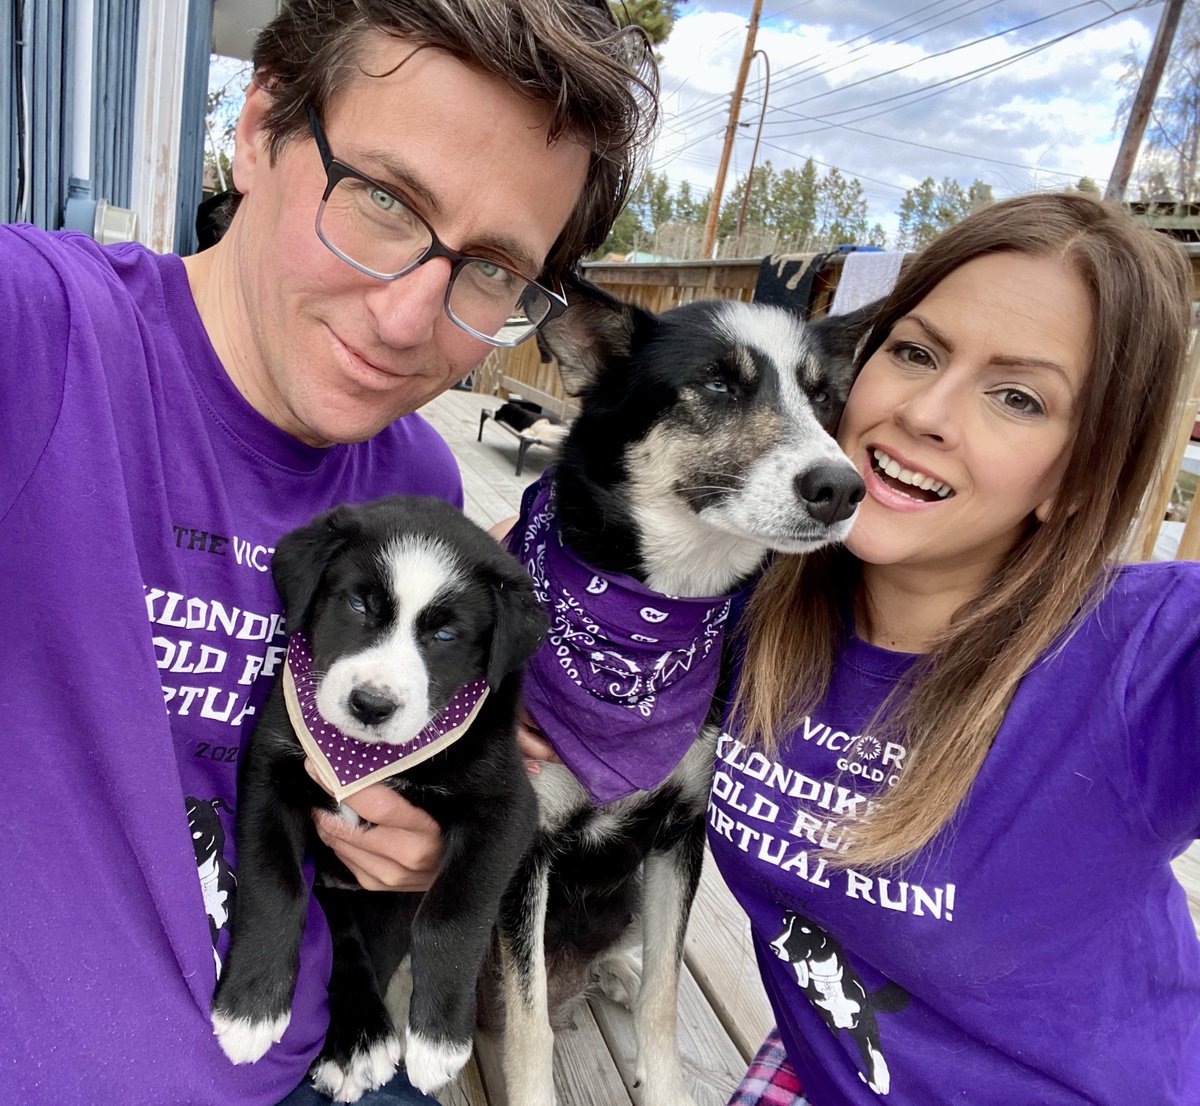 We are ready for another fun @VictoriaGold Klondike Gold Ruff Virtual Run to support Humane Society Yukon! Are you? 🐕 🐩🐈 #Funrun #Furryfriends #humanesociety #Yukon #YukonGold #Klondike